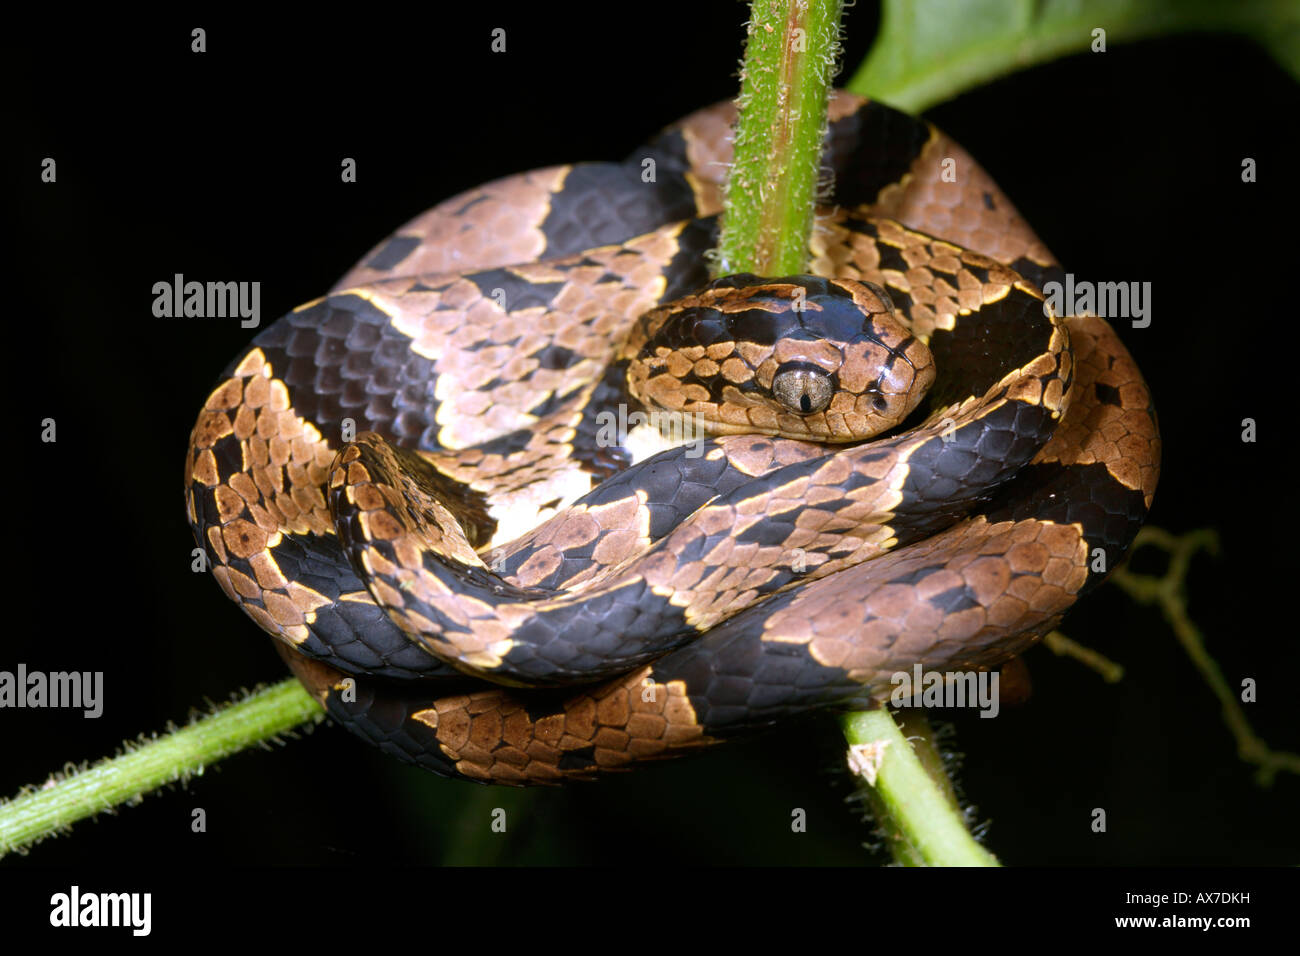 Snail eating snake (Dipsas sp.) from cloudforest in Ecuador Stock Photo